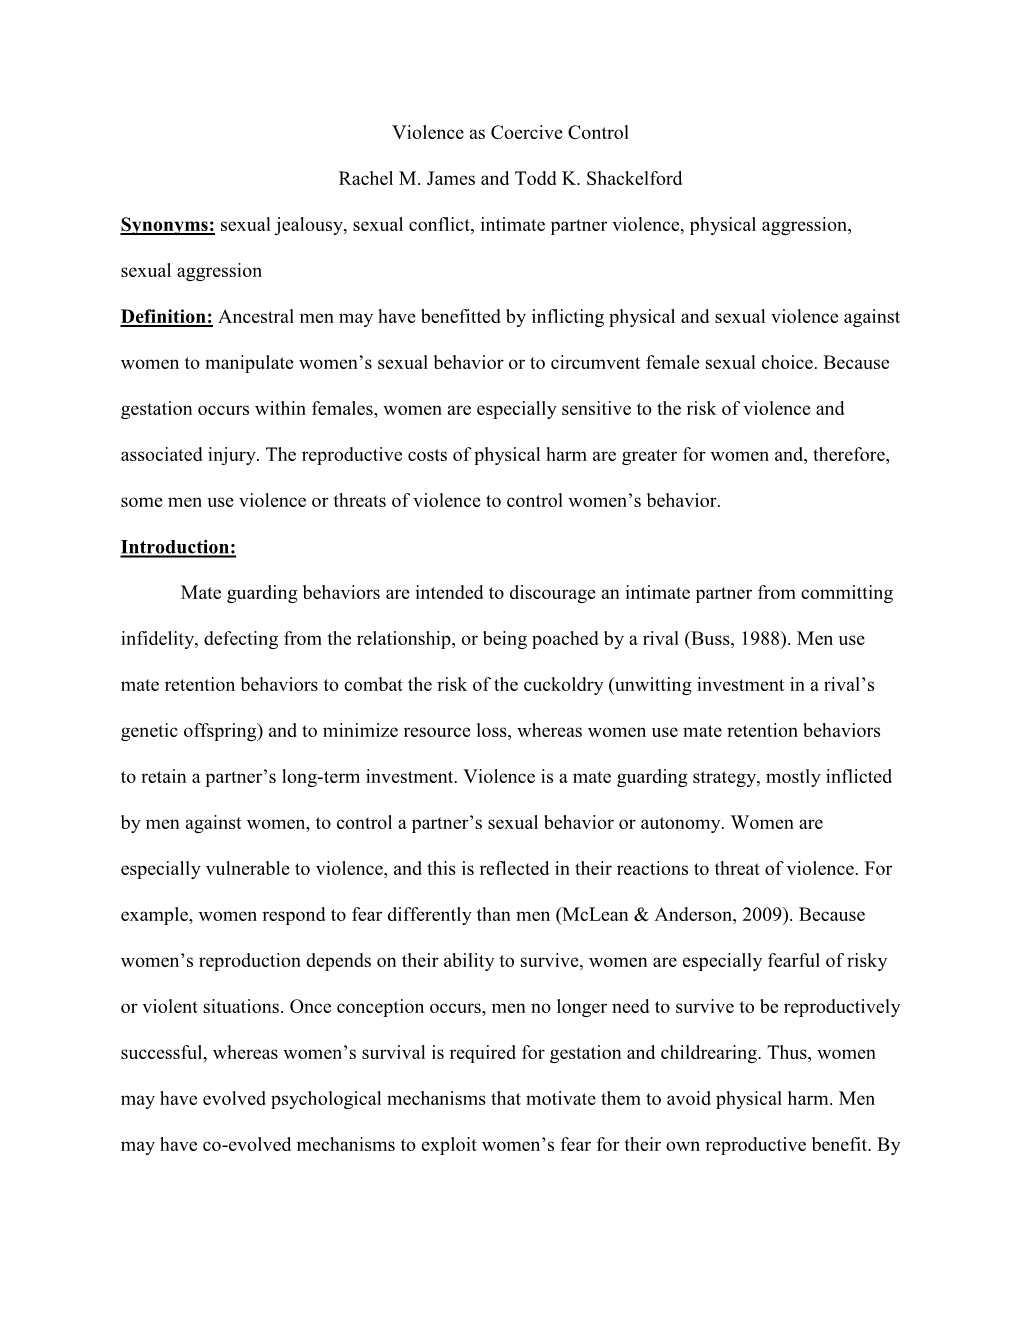 Violence As Coercive Control Rachel M. James and Todd K. Shackelford Synonyms: Sexual Jealousy, Sexual Conflict, Intimate Partne